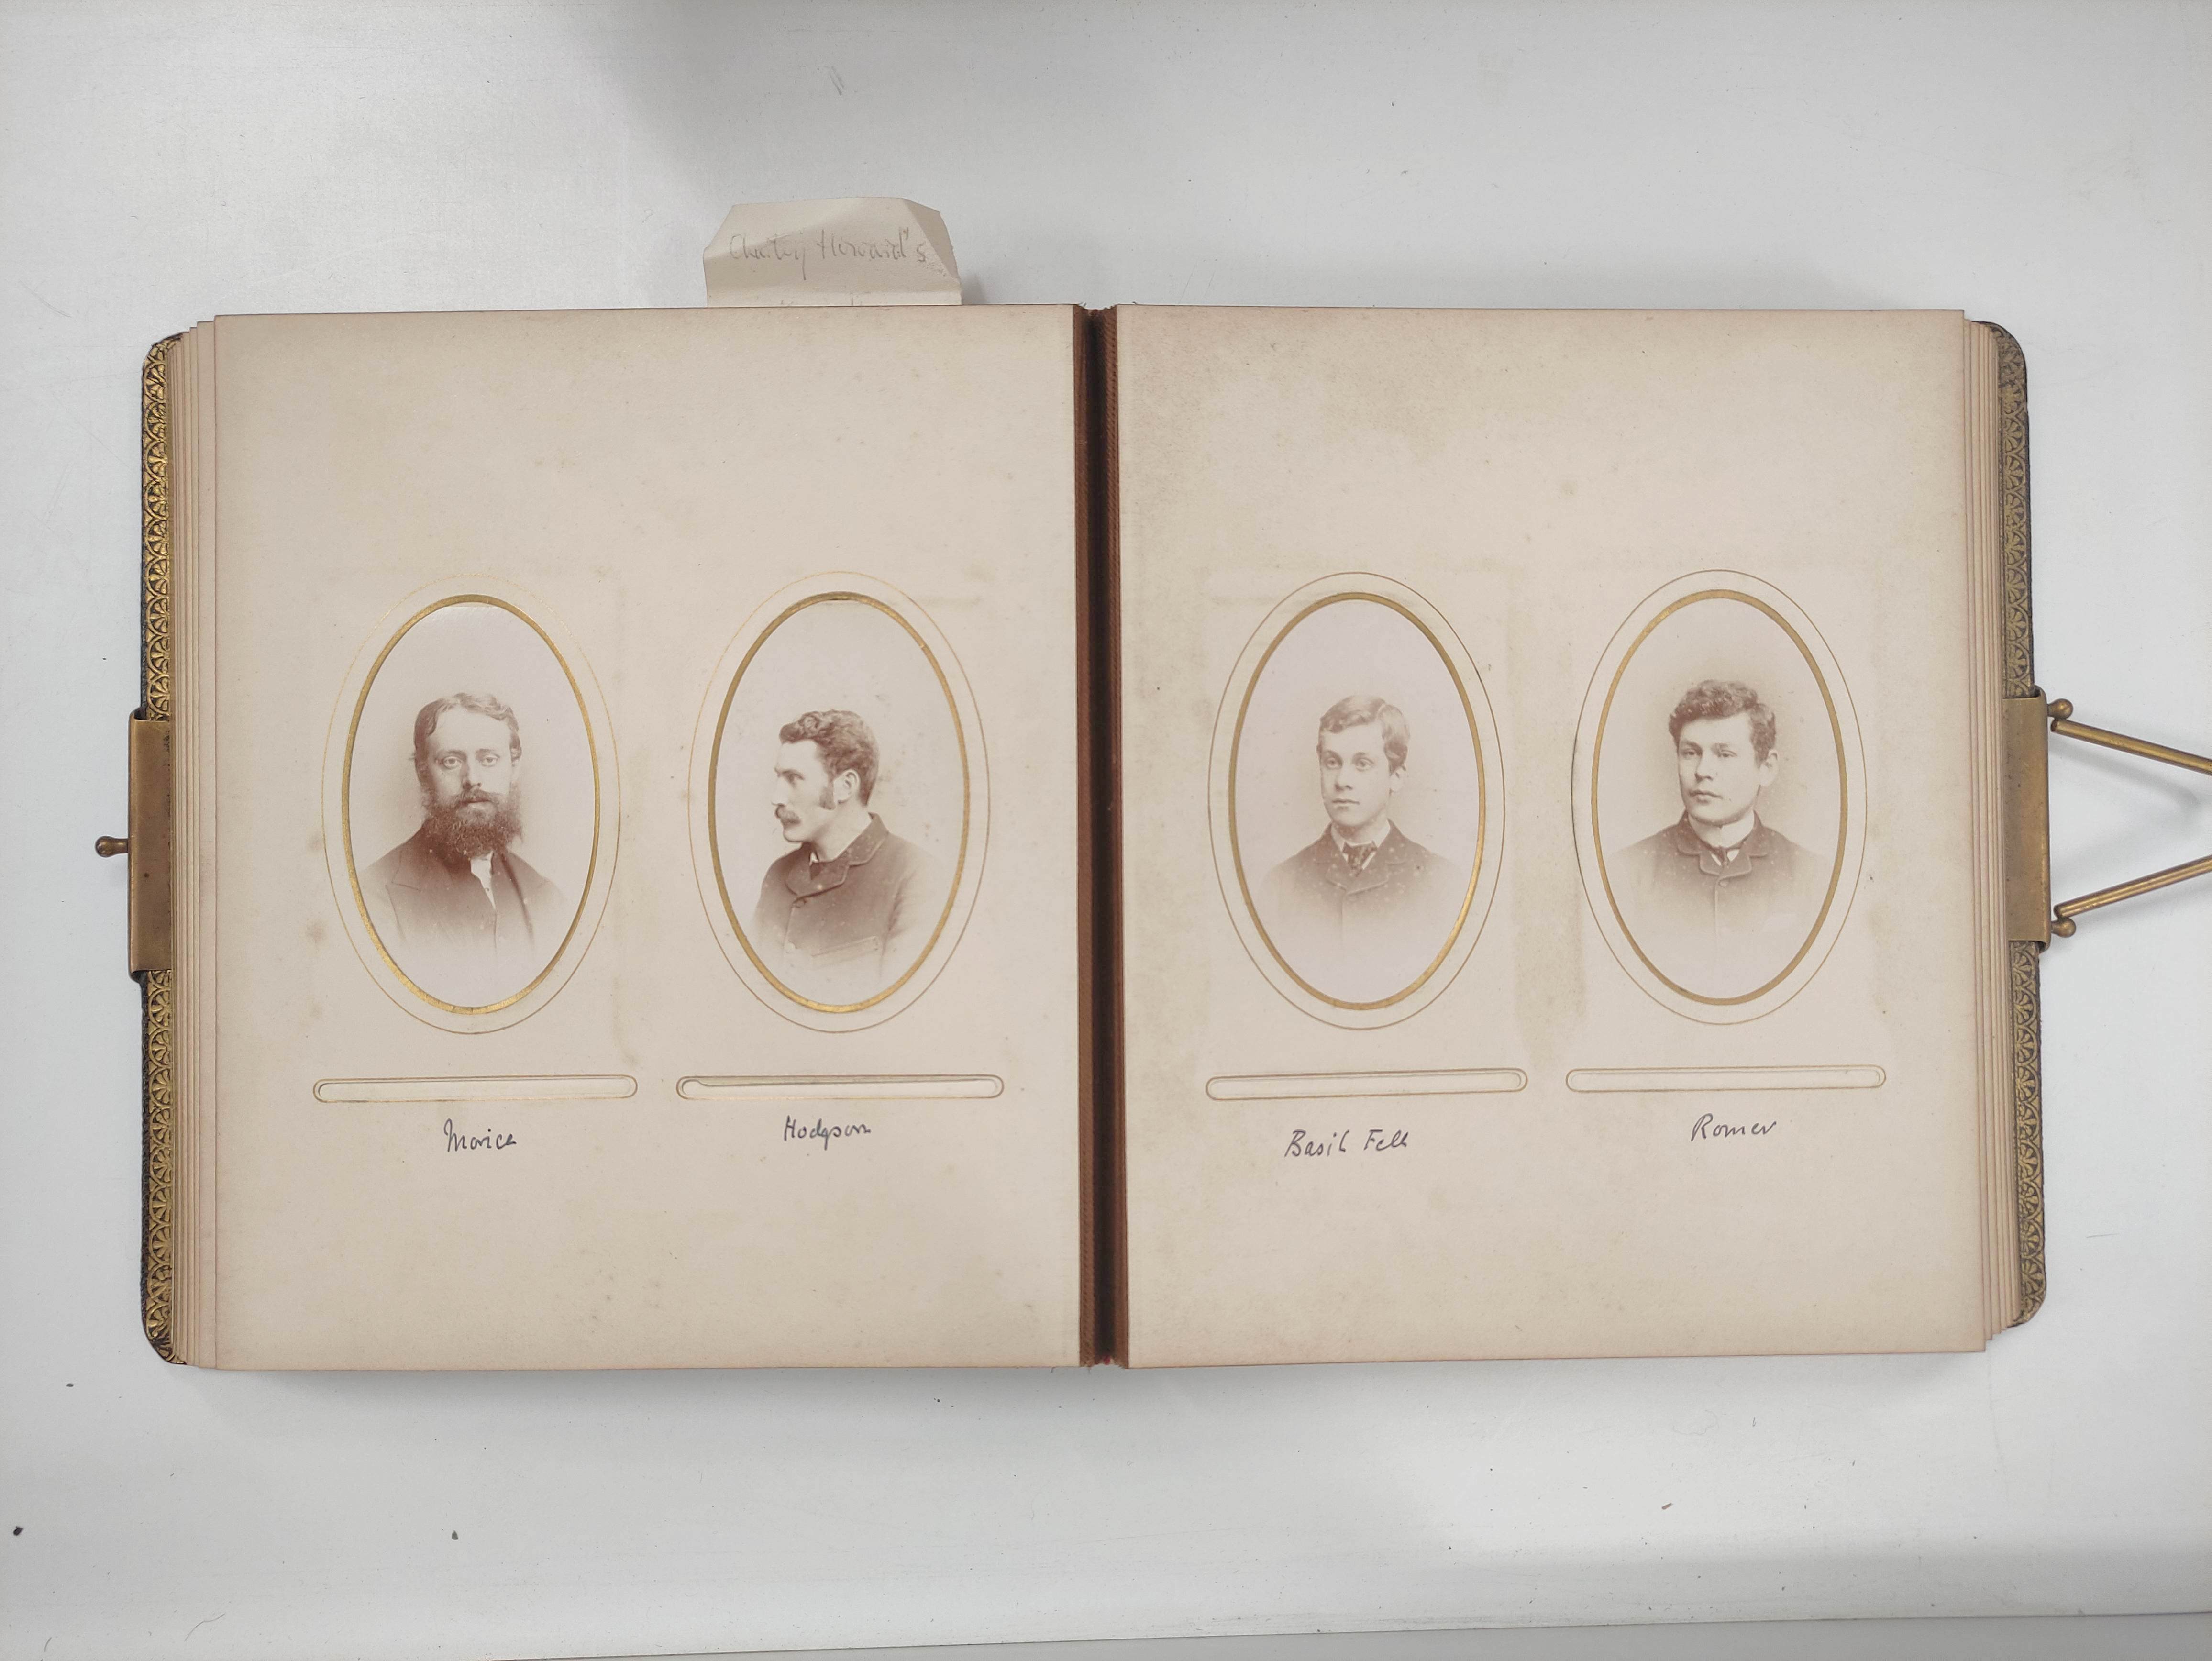 Photographs. Photograph album belonging to Charles Howard, containing a large collection of 19th